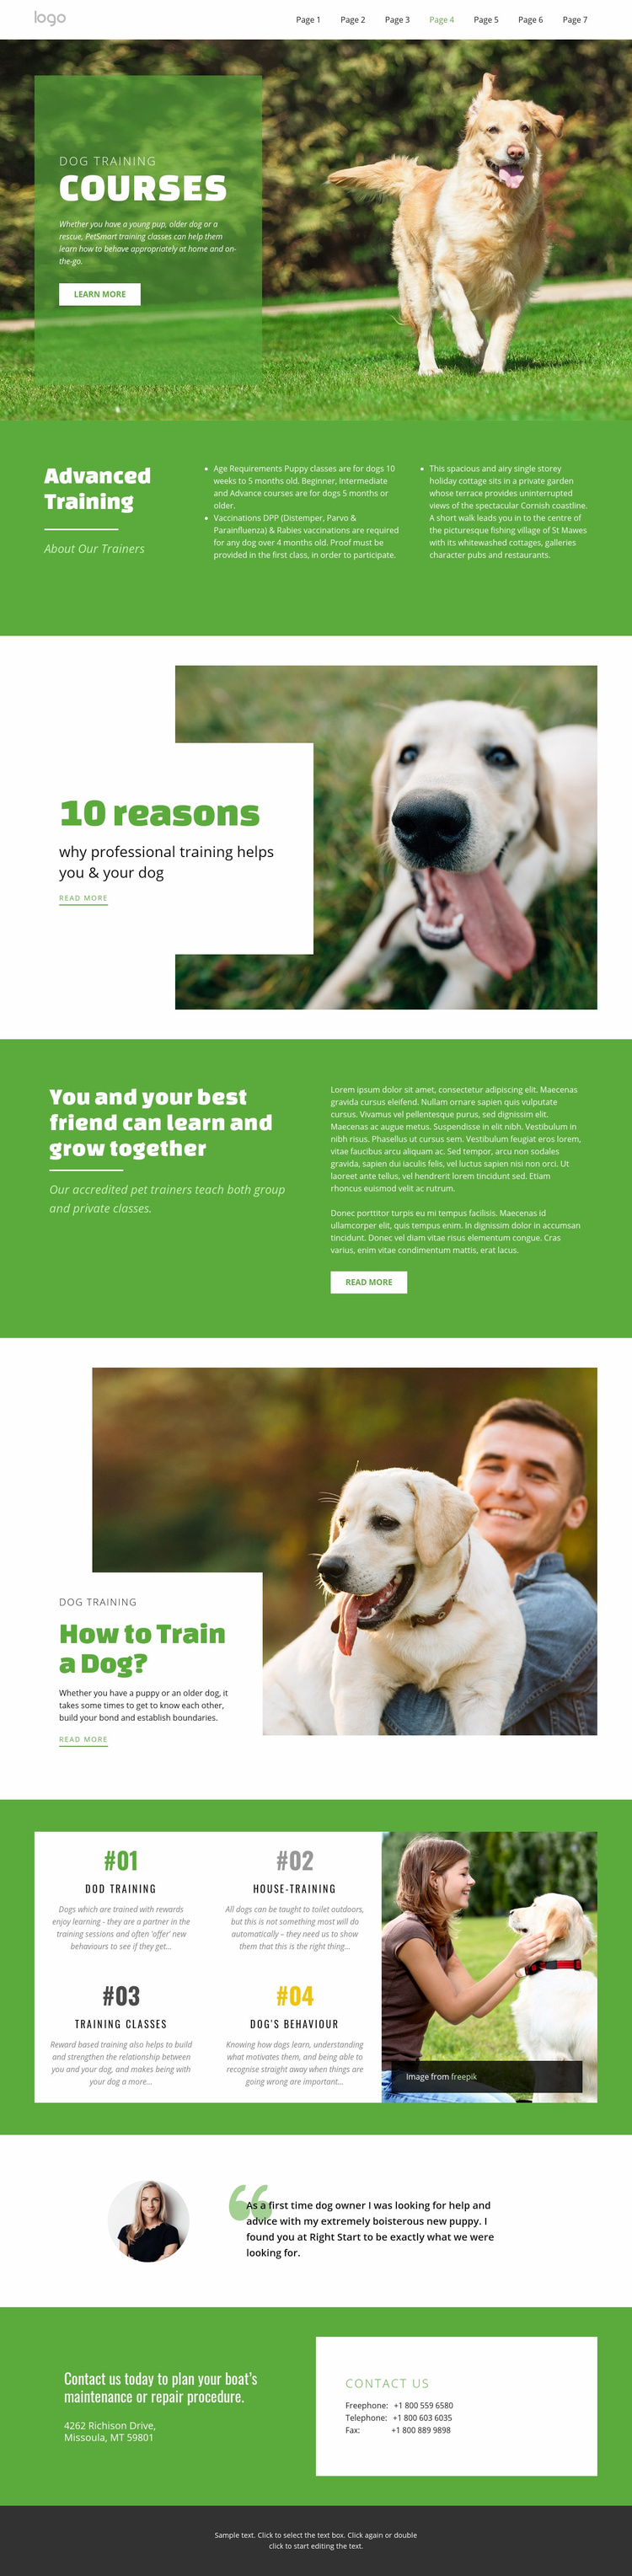 Training courses for pets Wix Template Alternative